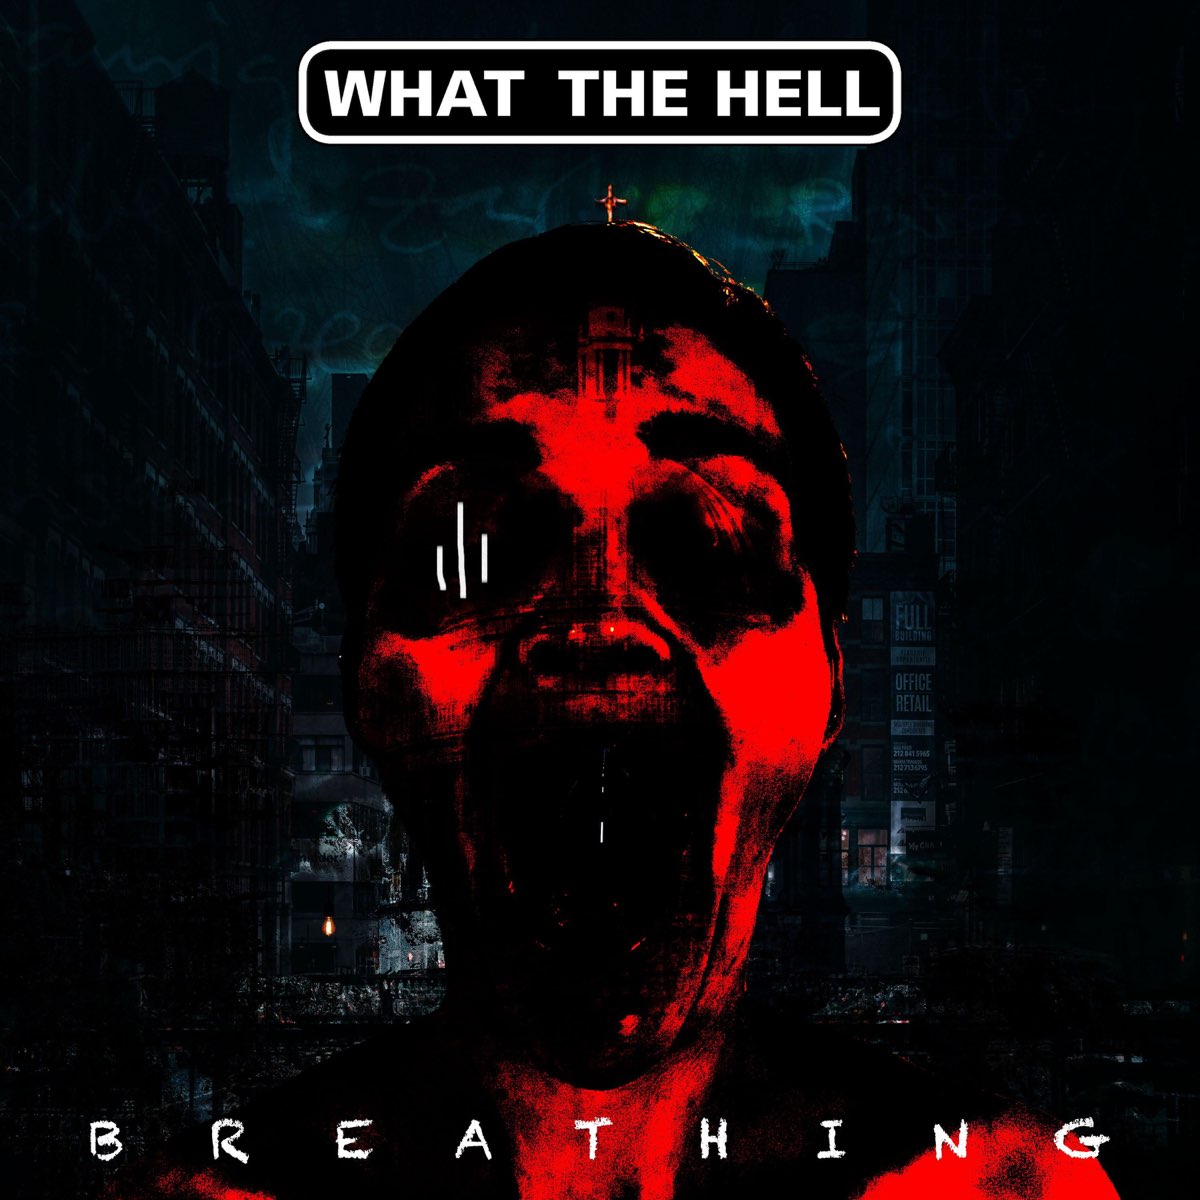 Hell music. What the Hell. Breathing Hell обложки. EMBRZ - Breathe год. What the Hell album.